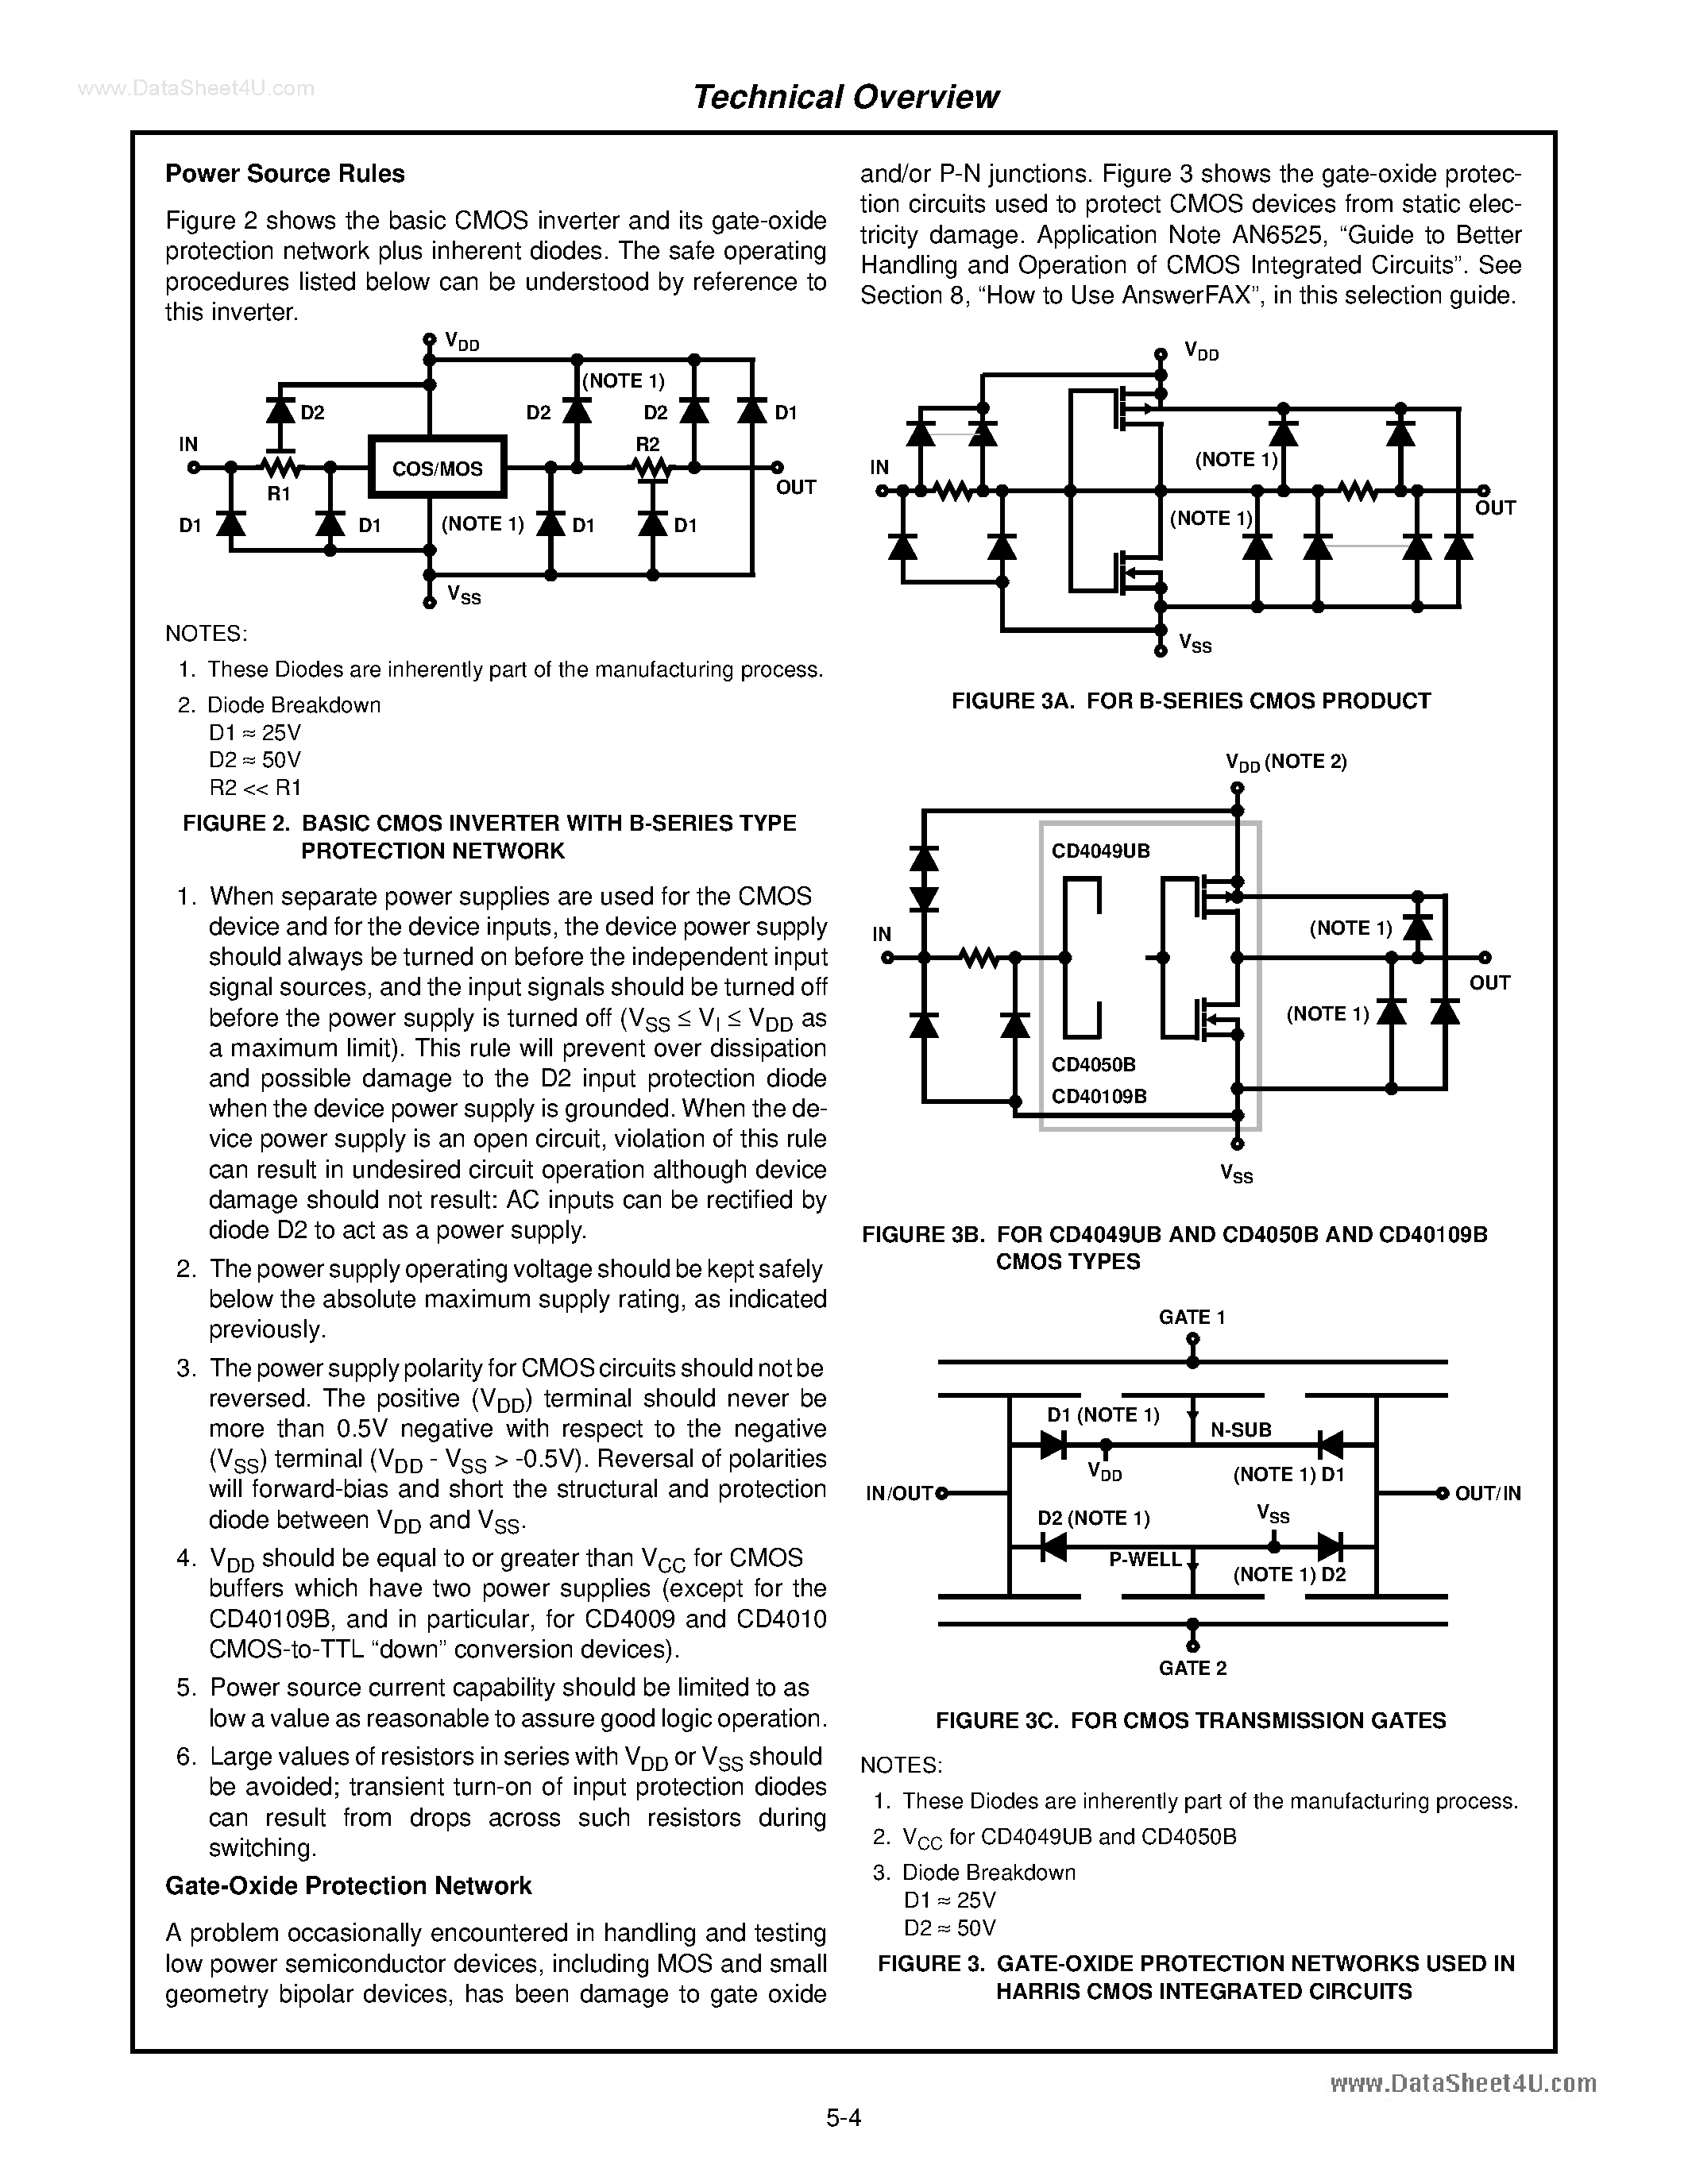 Datasheet CD4096B - (CD4000B Series) Technical Overview page 2